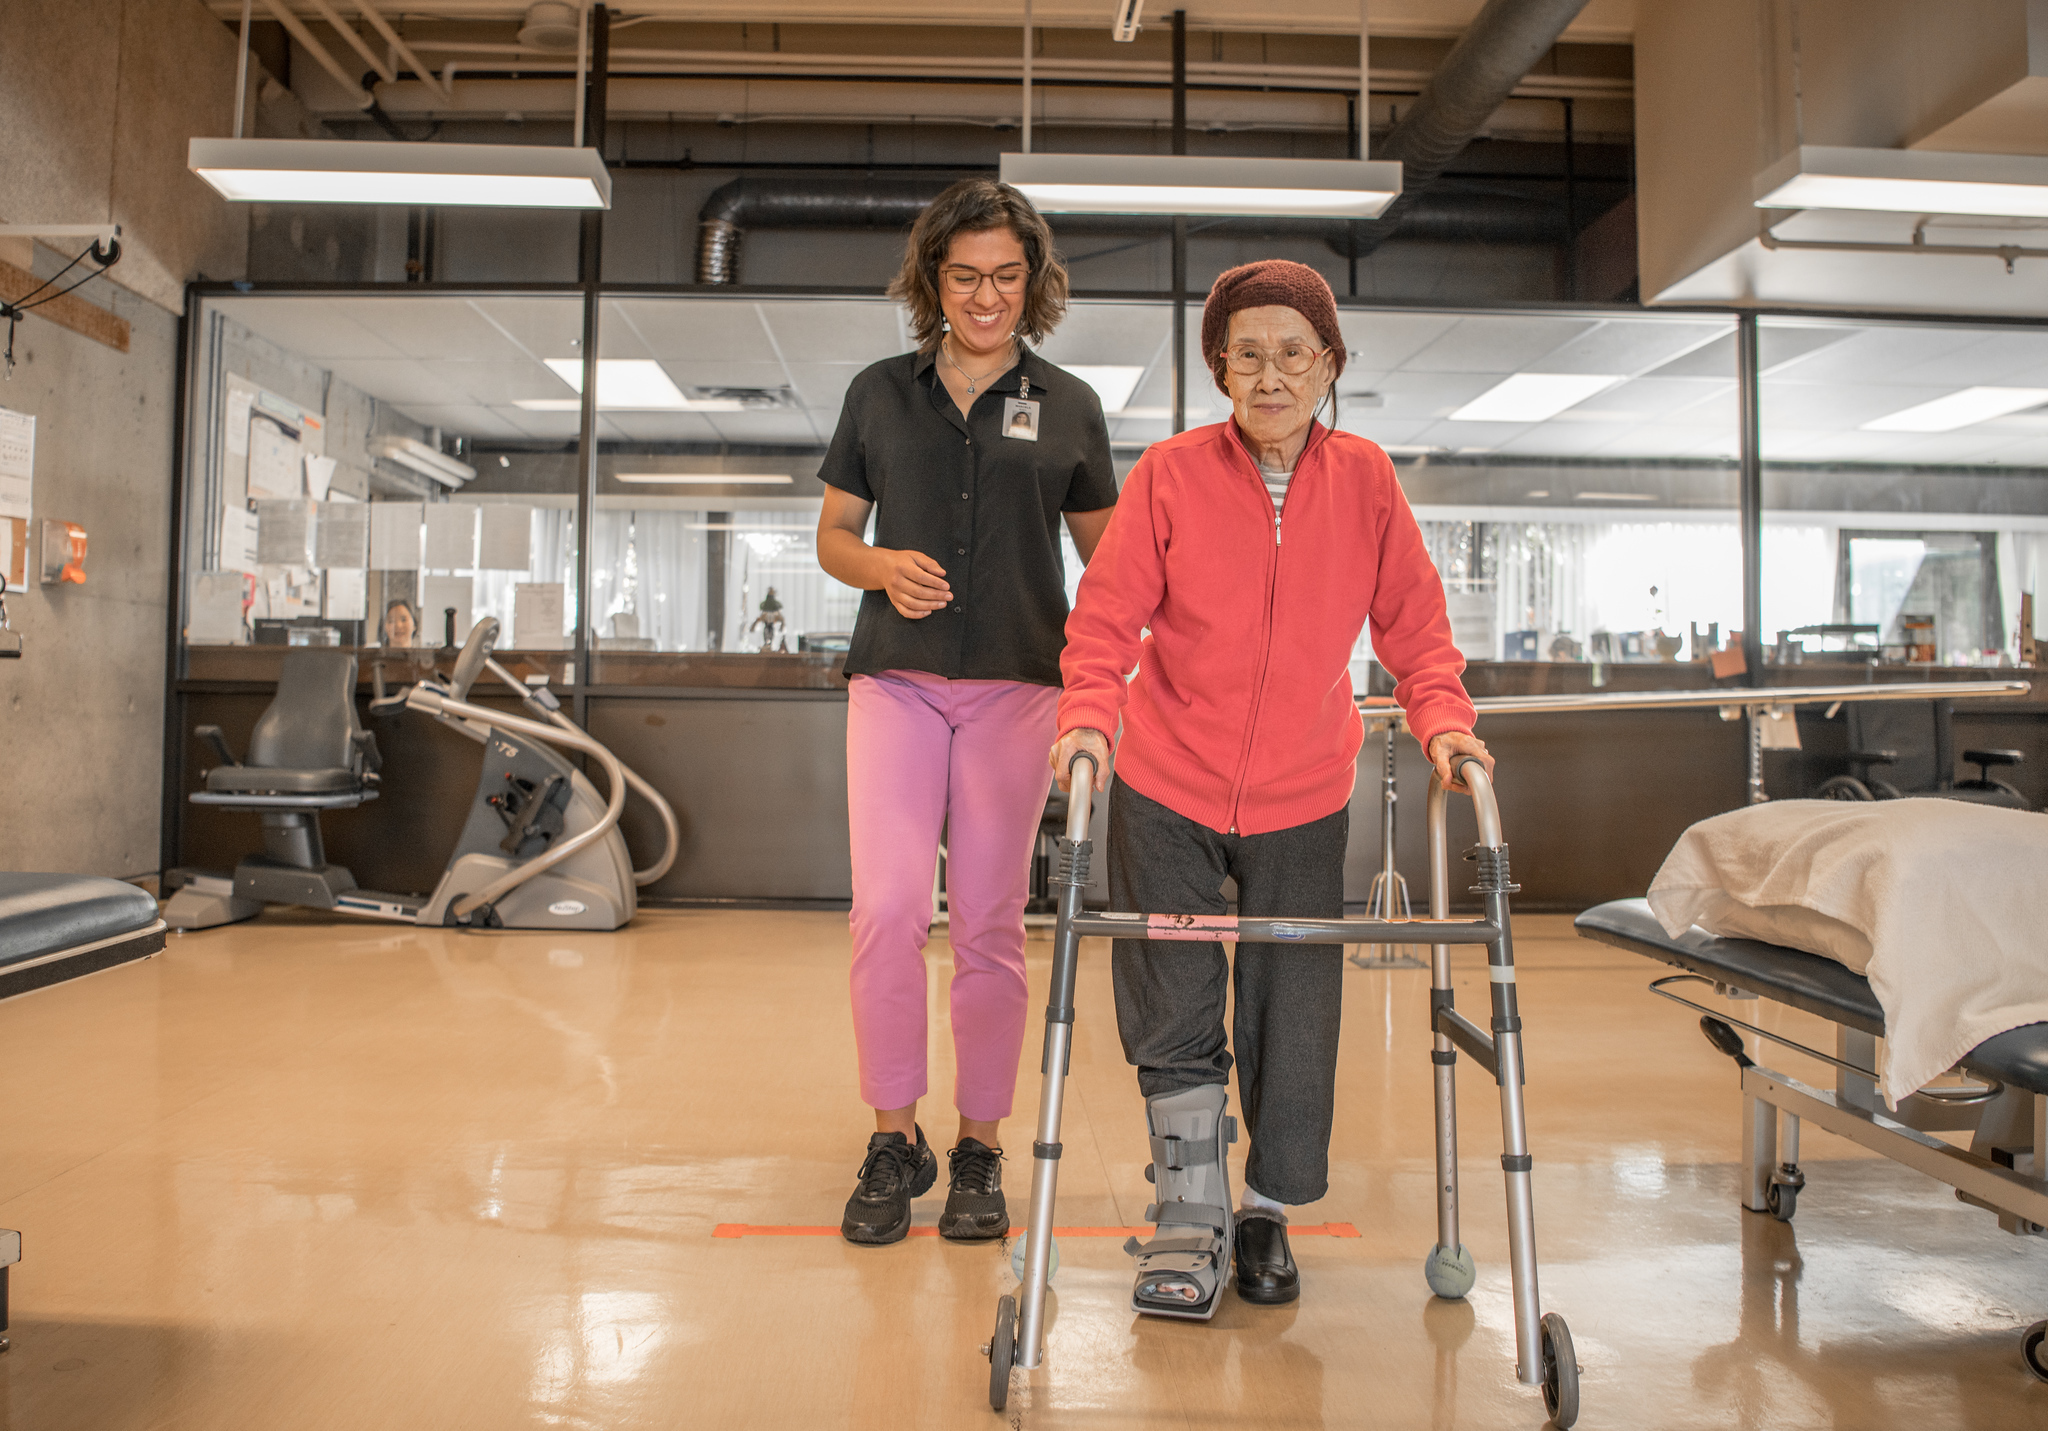 The cover image of the project portrays a caregiver walking behind a senior woman.